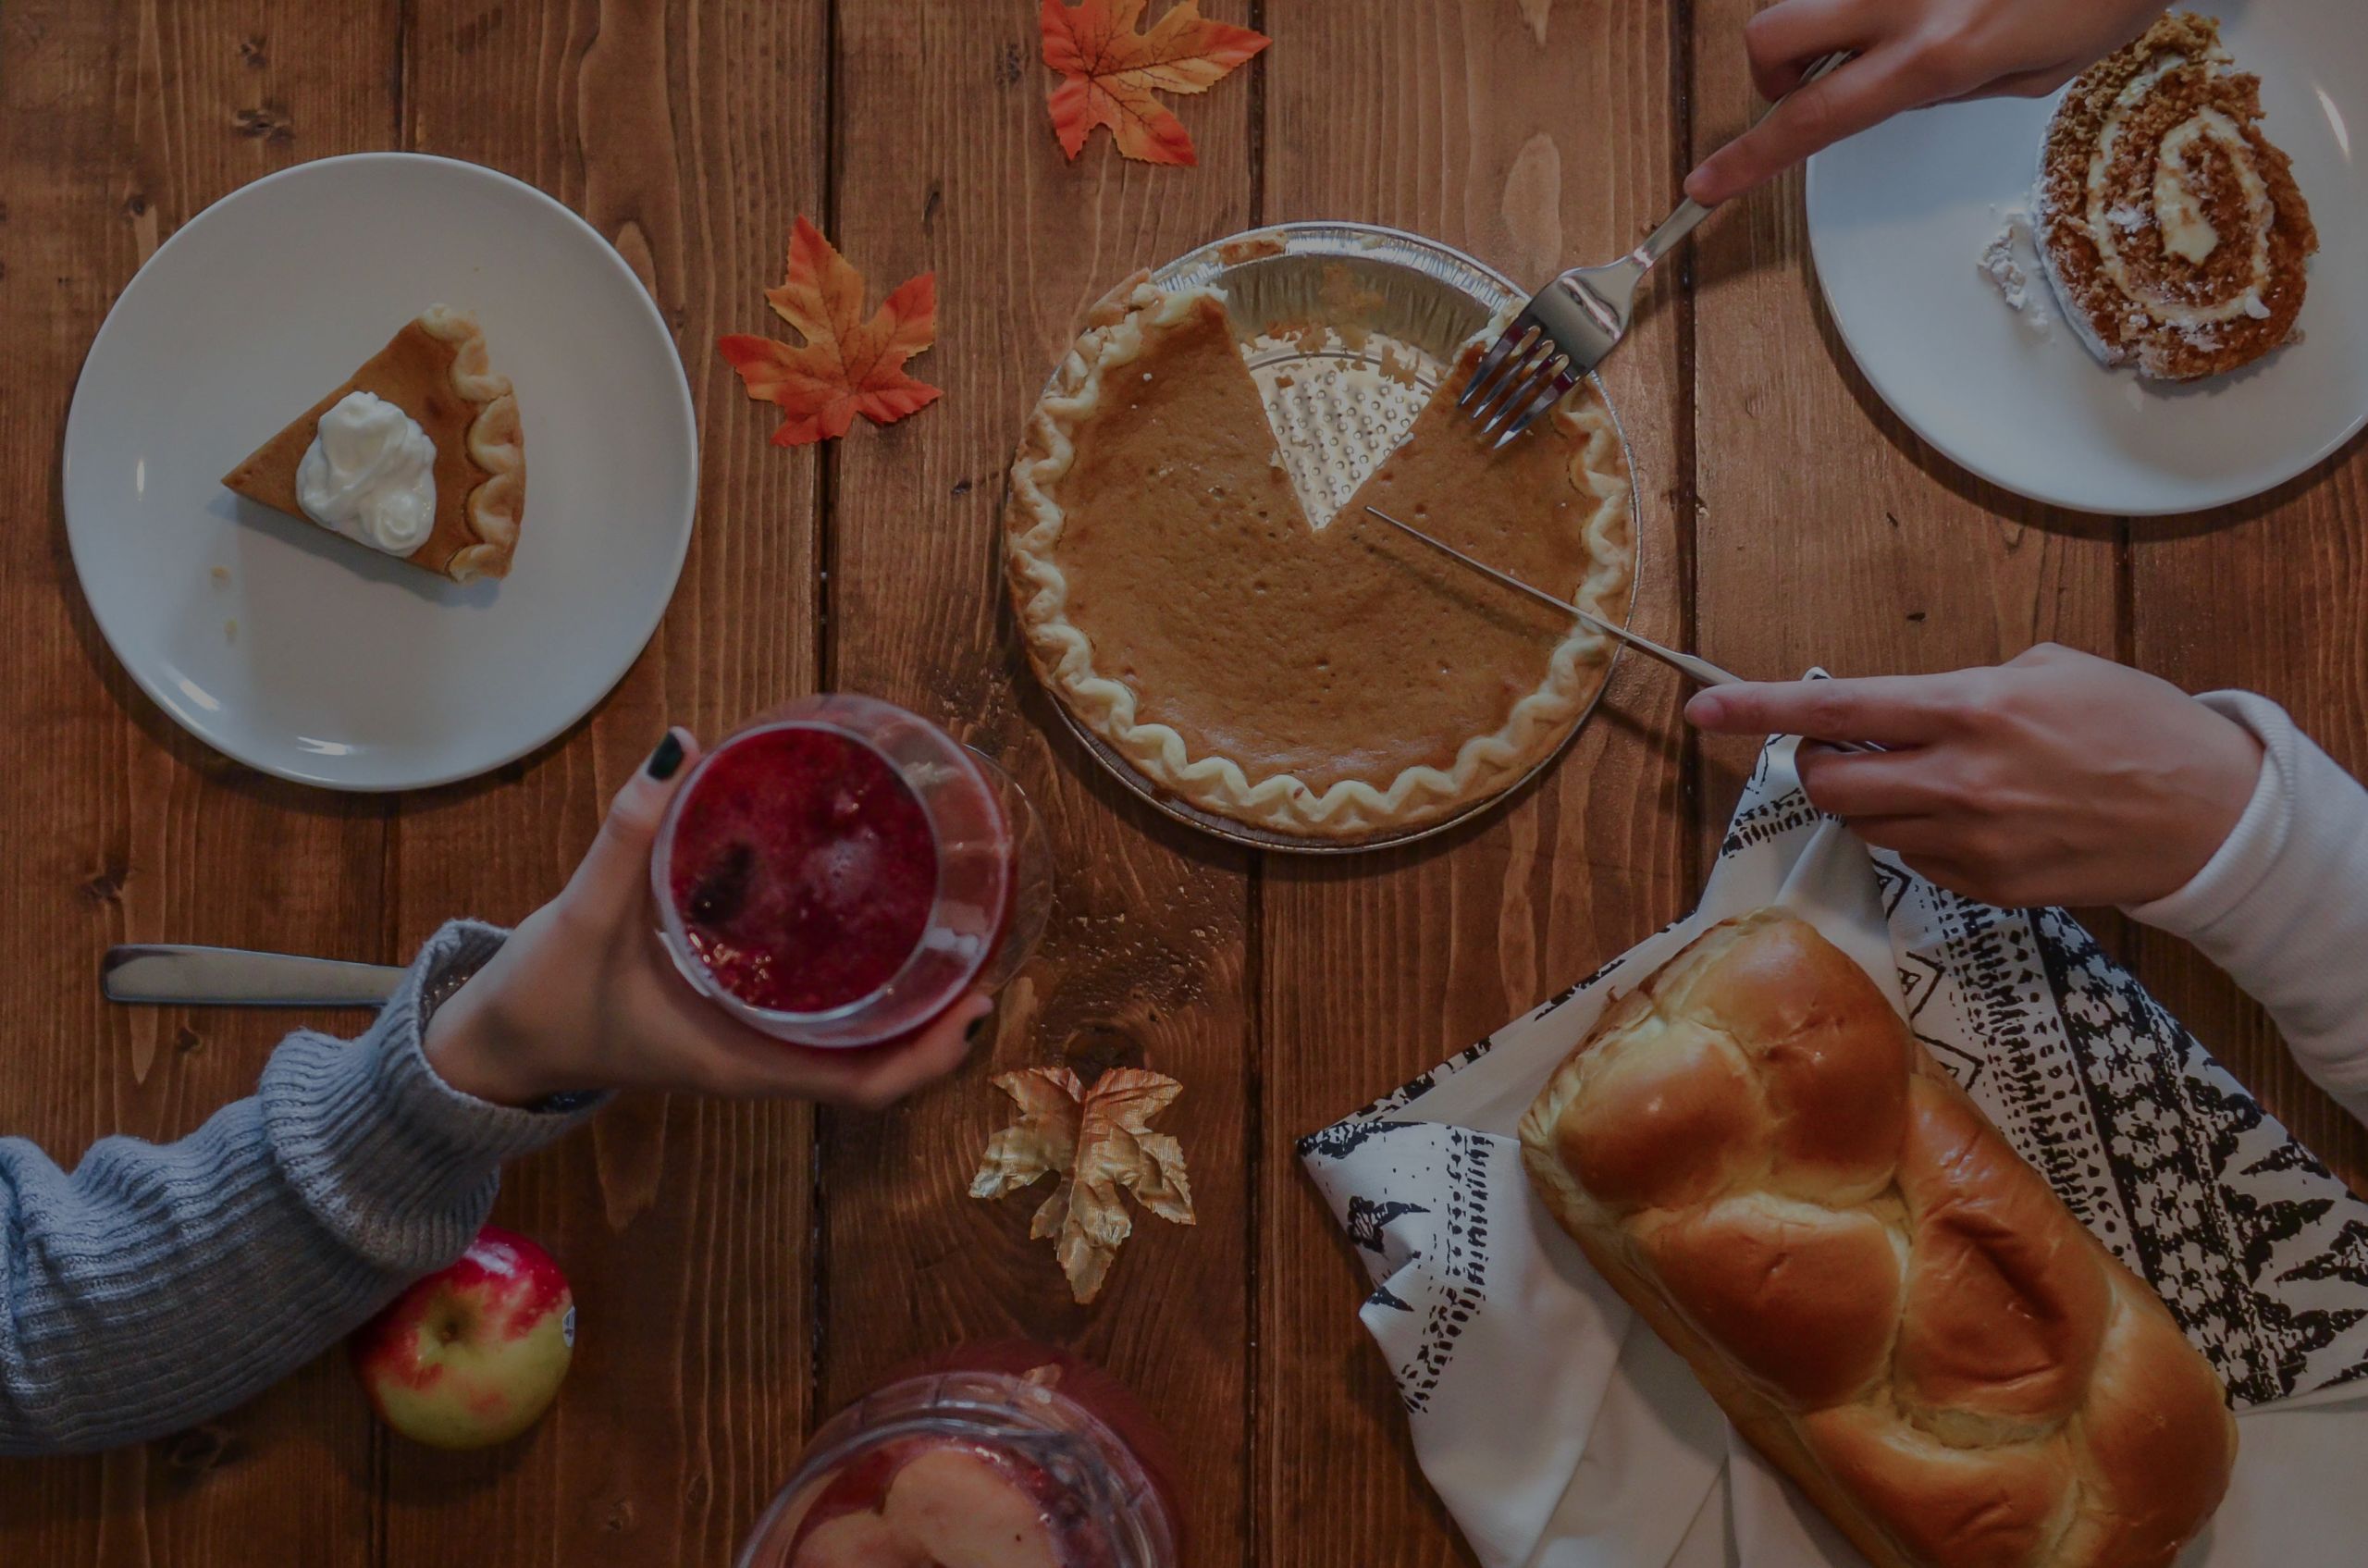 10 Tiny Steps to Get Your House Ready for Thanksgiving Guests